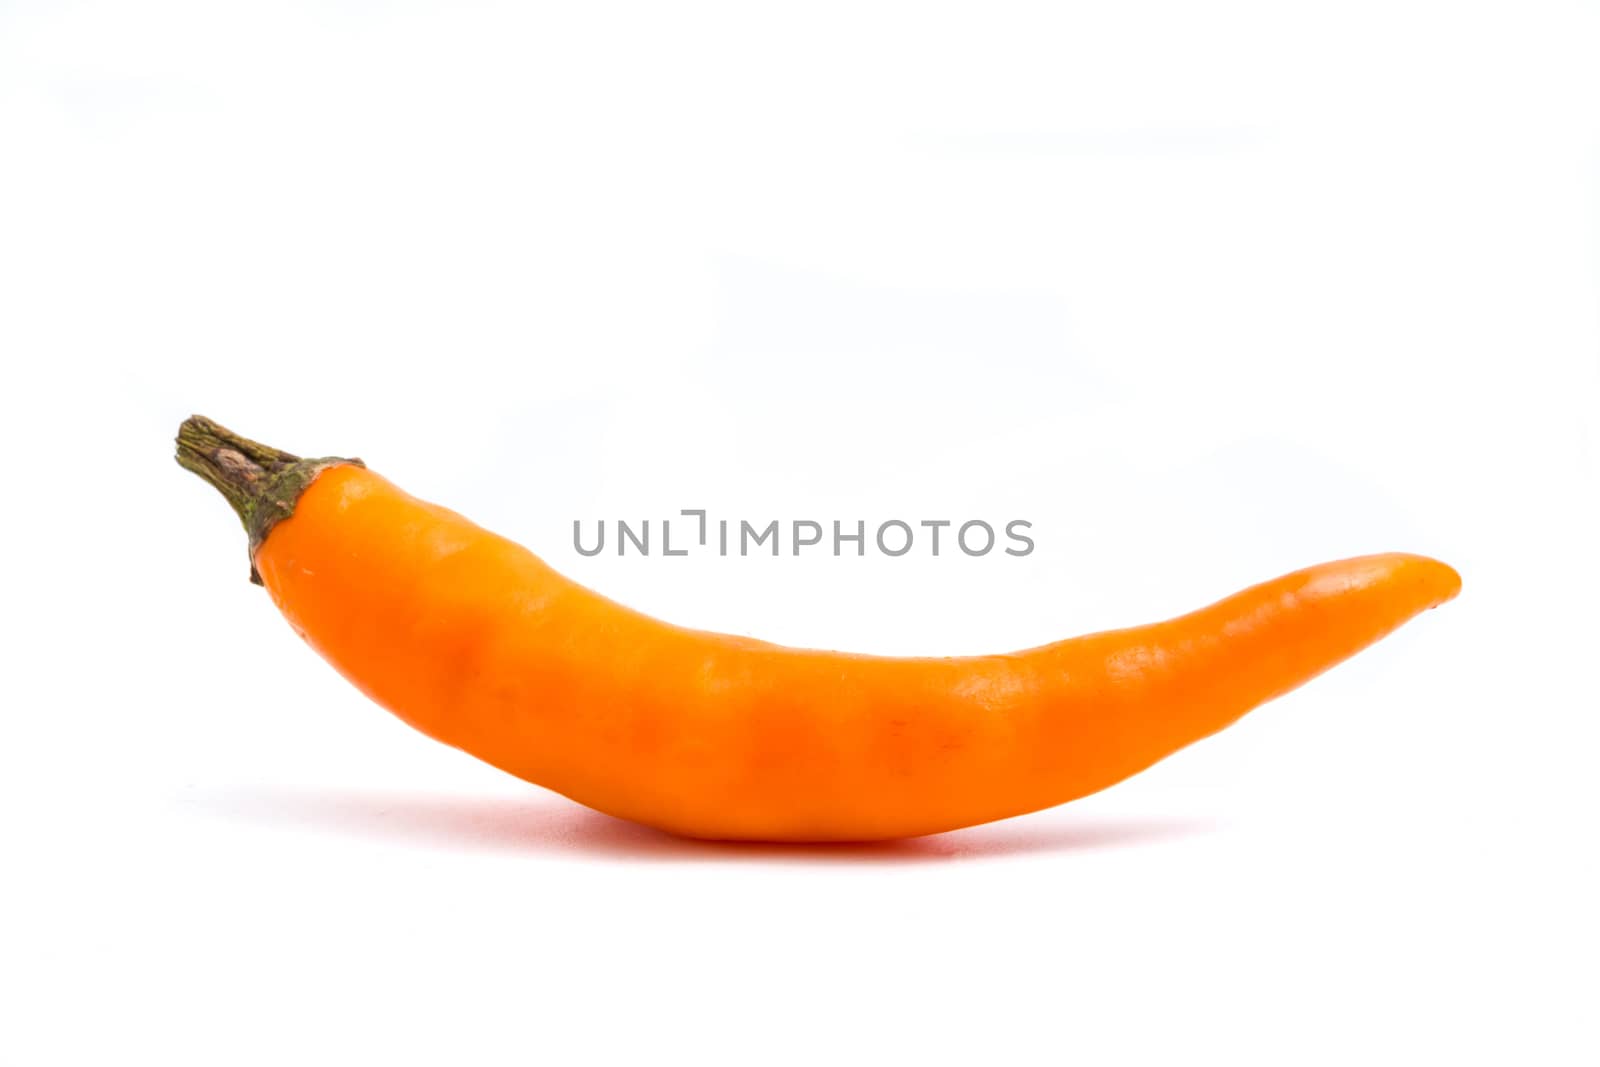 Fresh Yellow chili papper on white background. by ronnarong